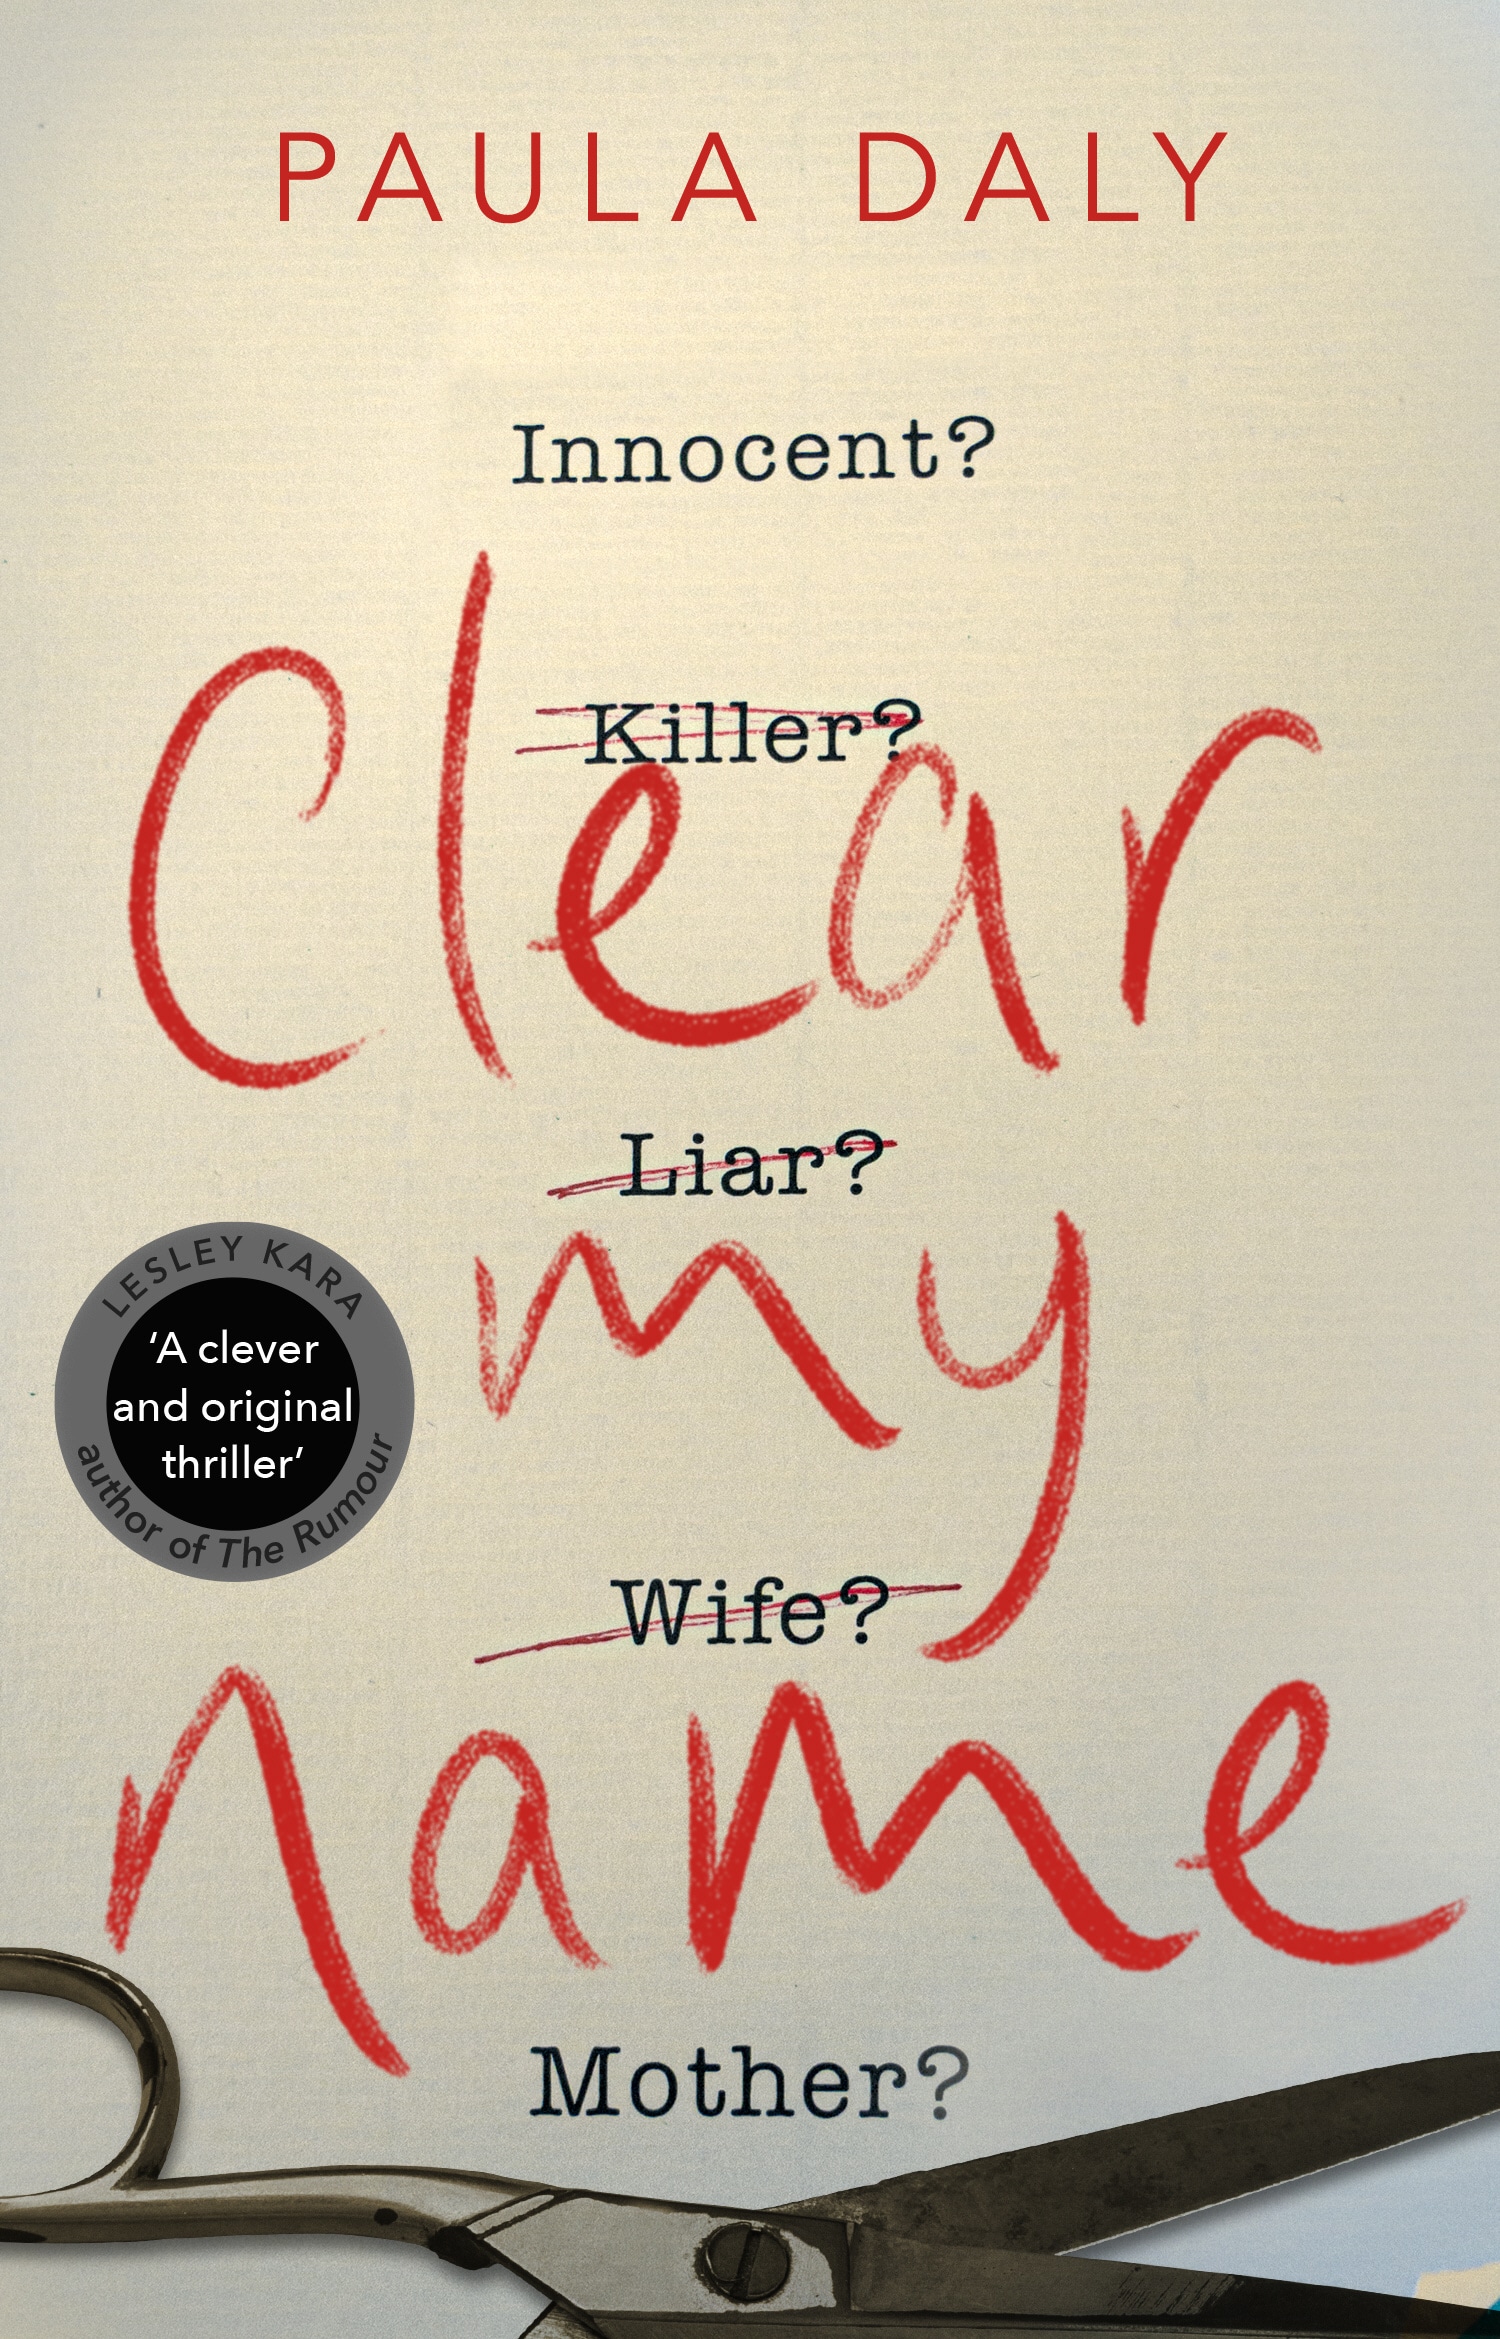 Book “Clear My Name” by Paula Daly — April 2, 2020